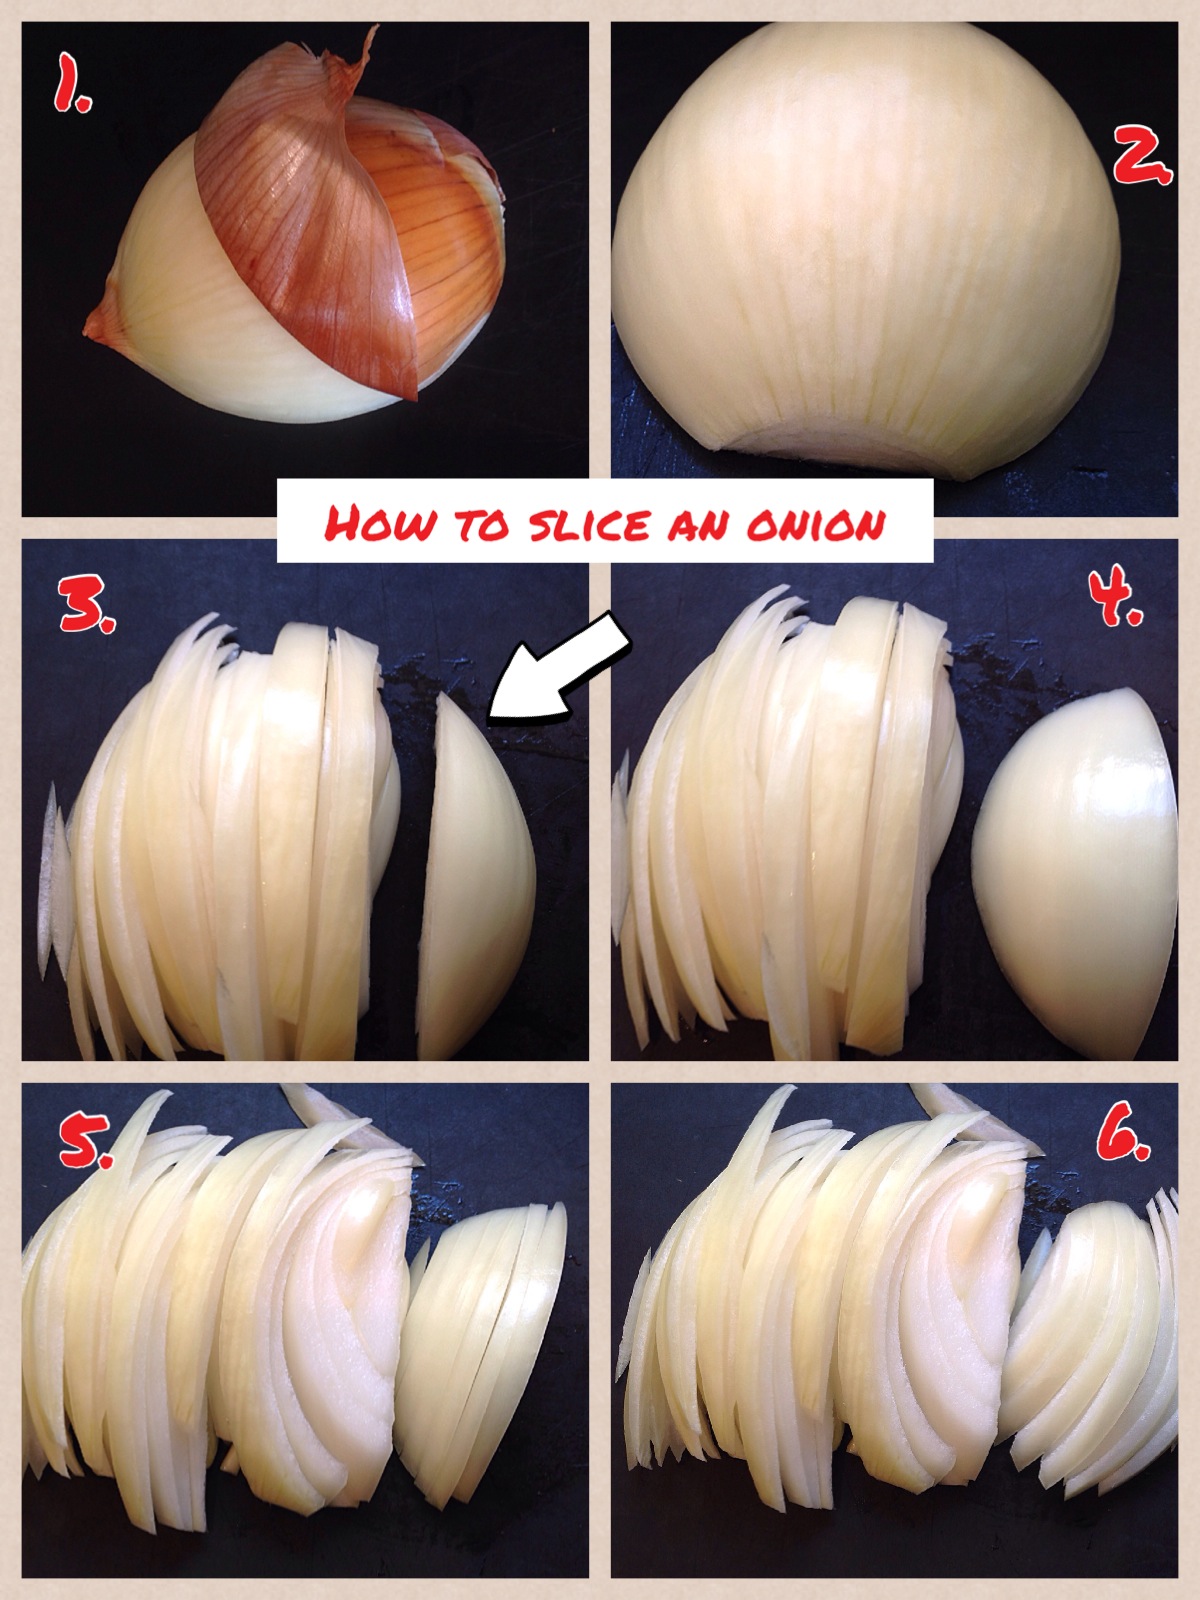 How to Slice an Onion (With Video)